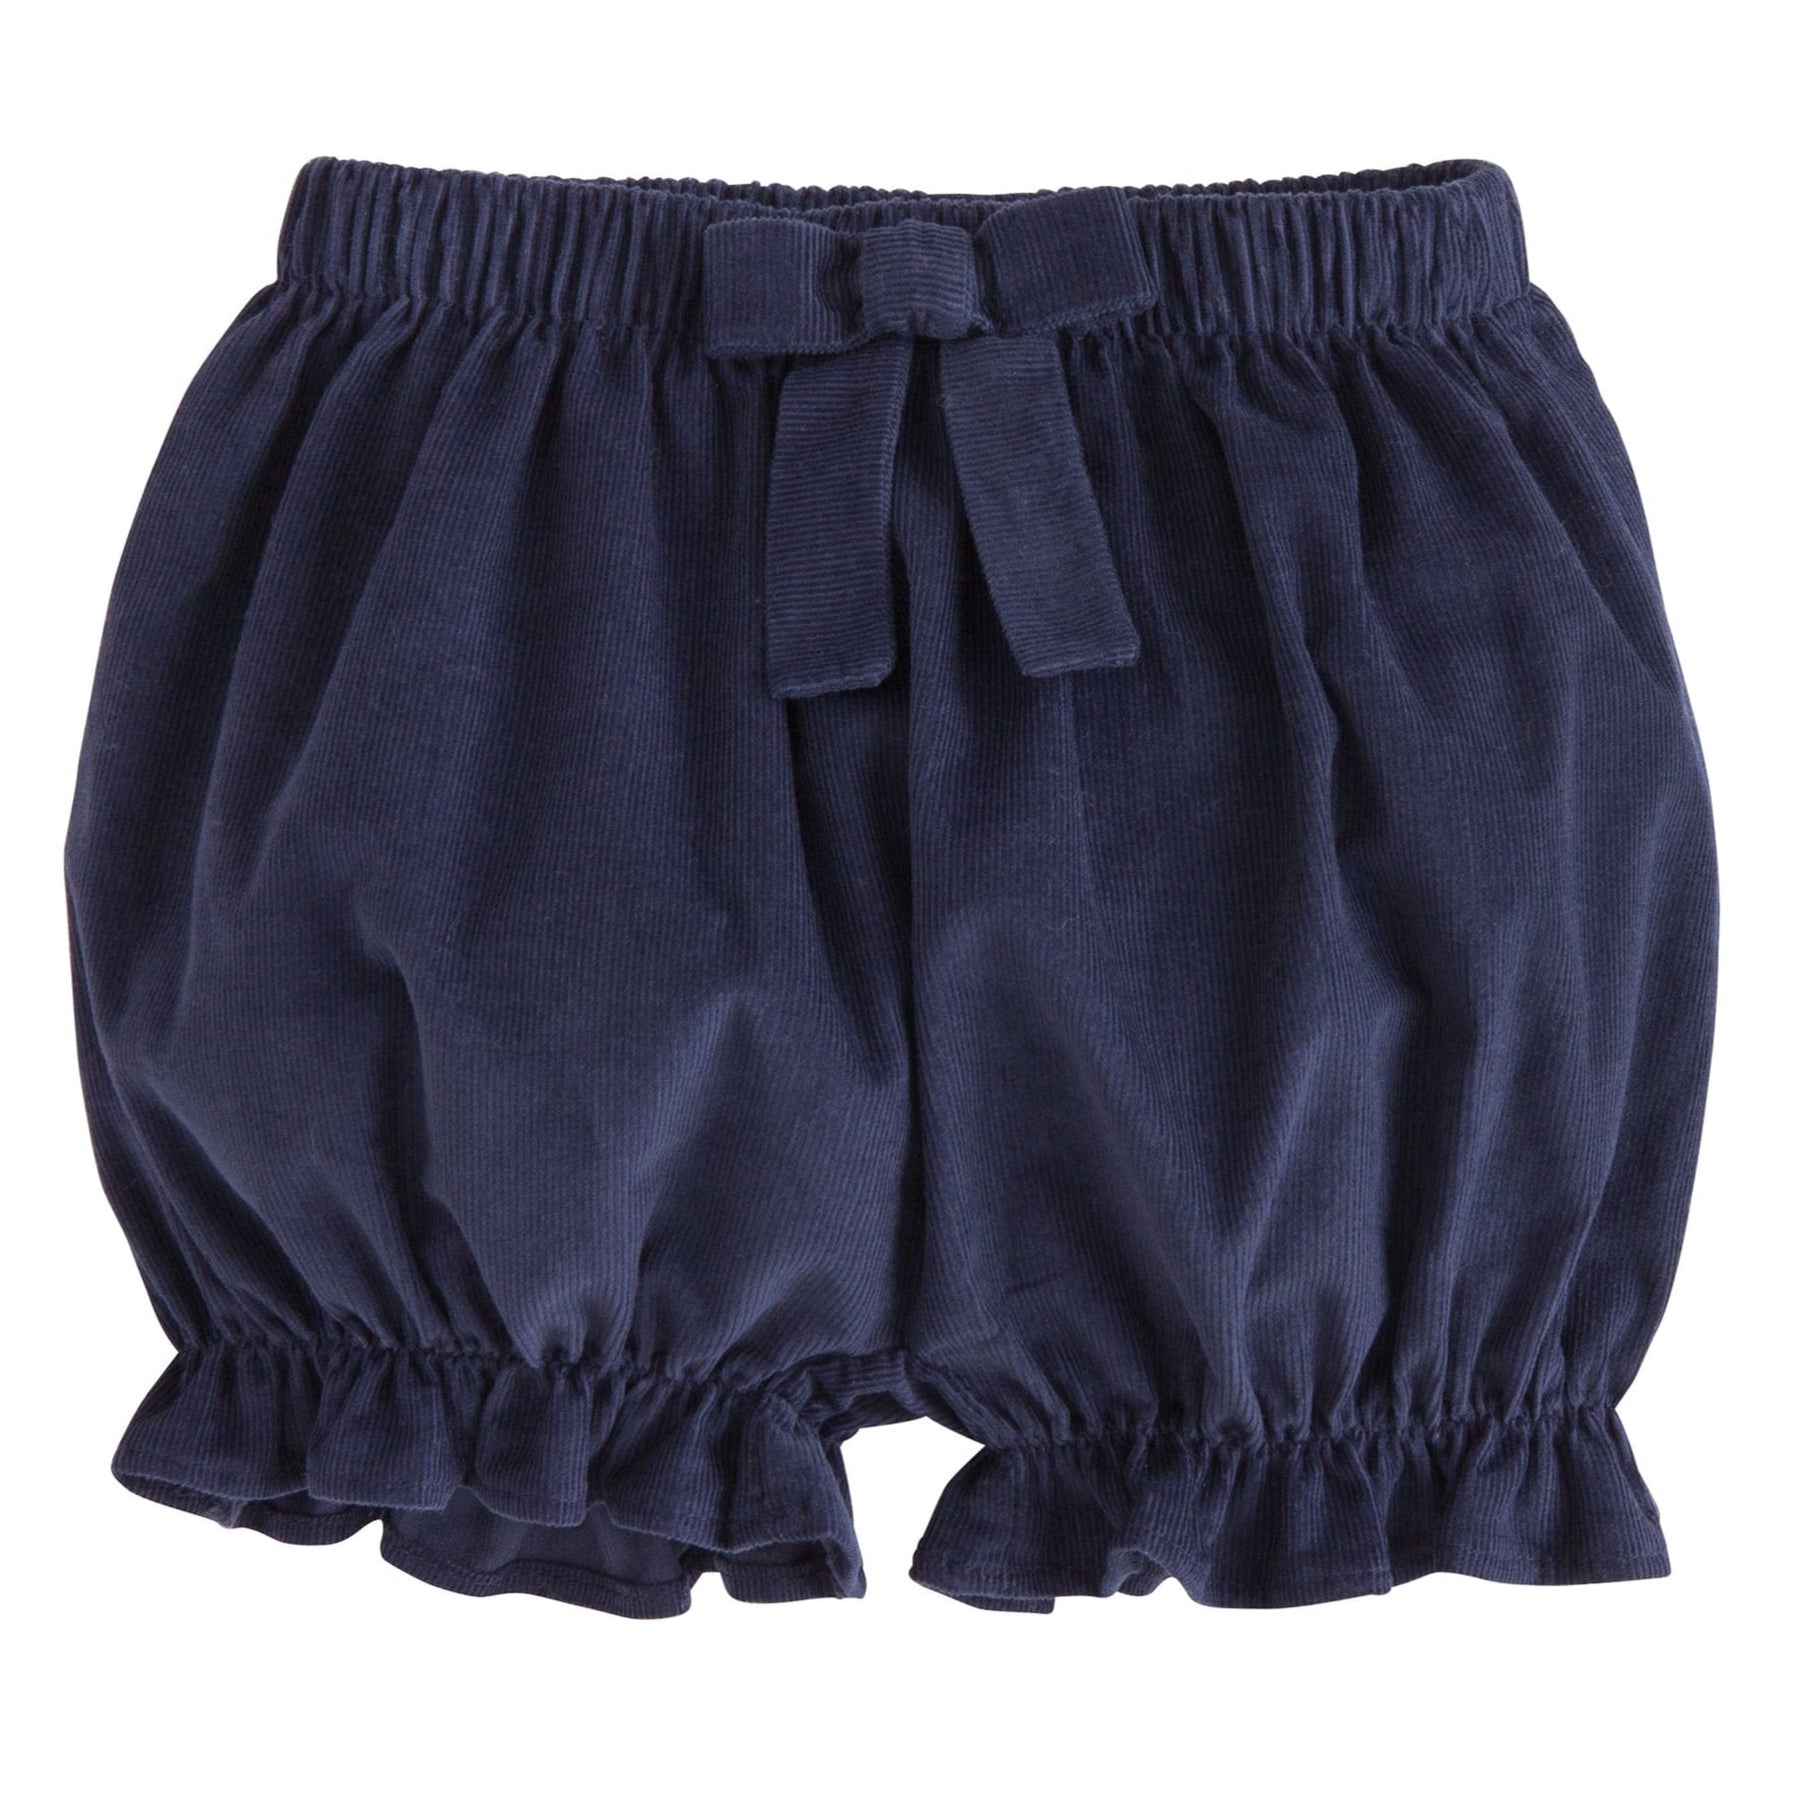 seguridadindustrialcr classic childrens clothing girls navy corduroy bloomers with bow